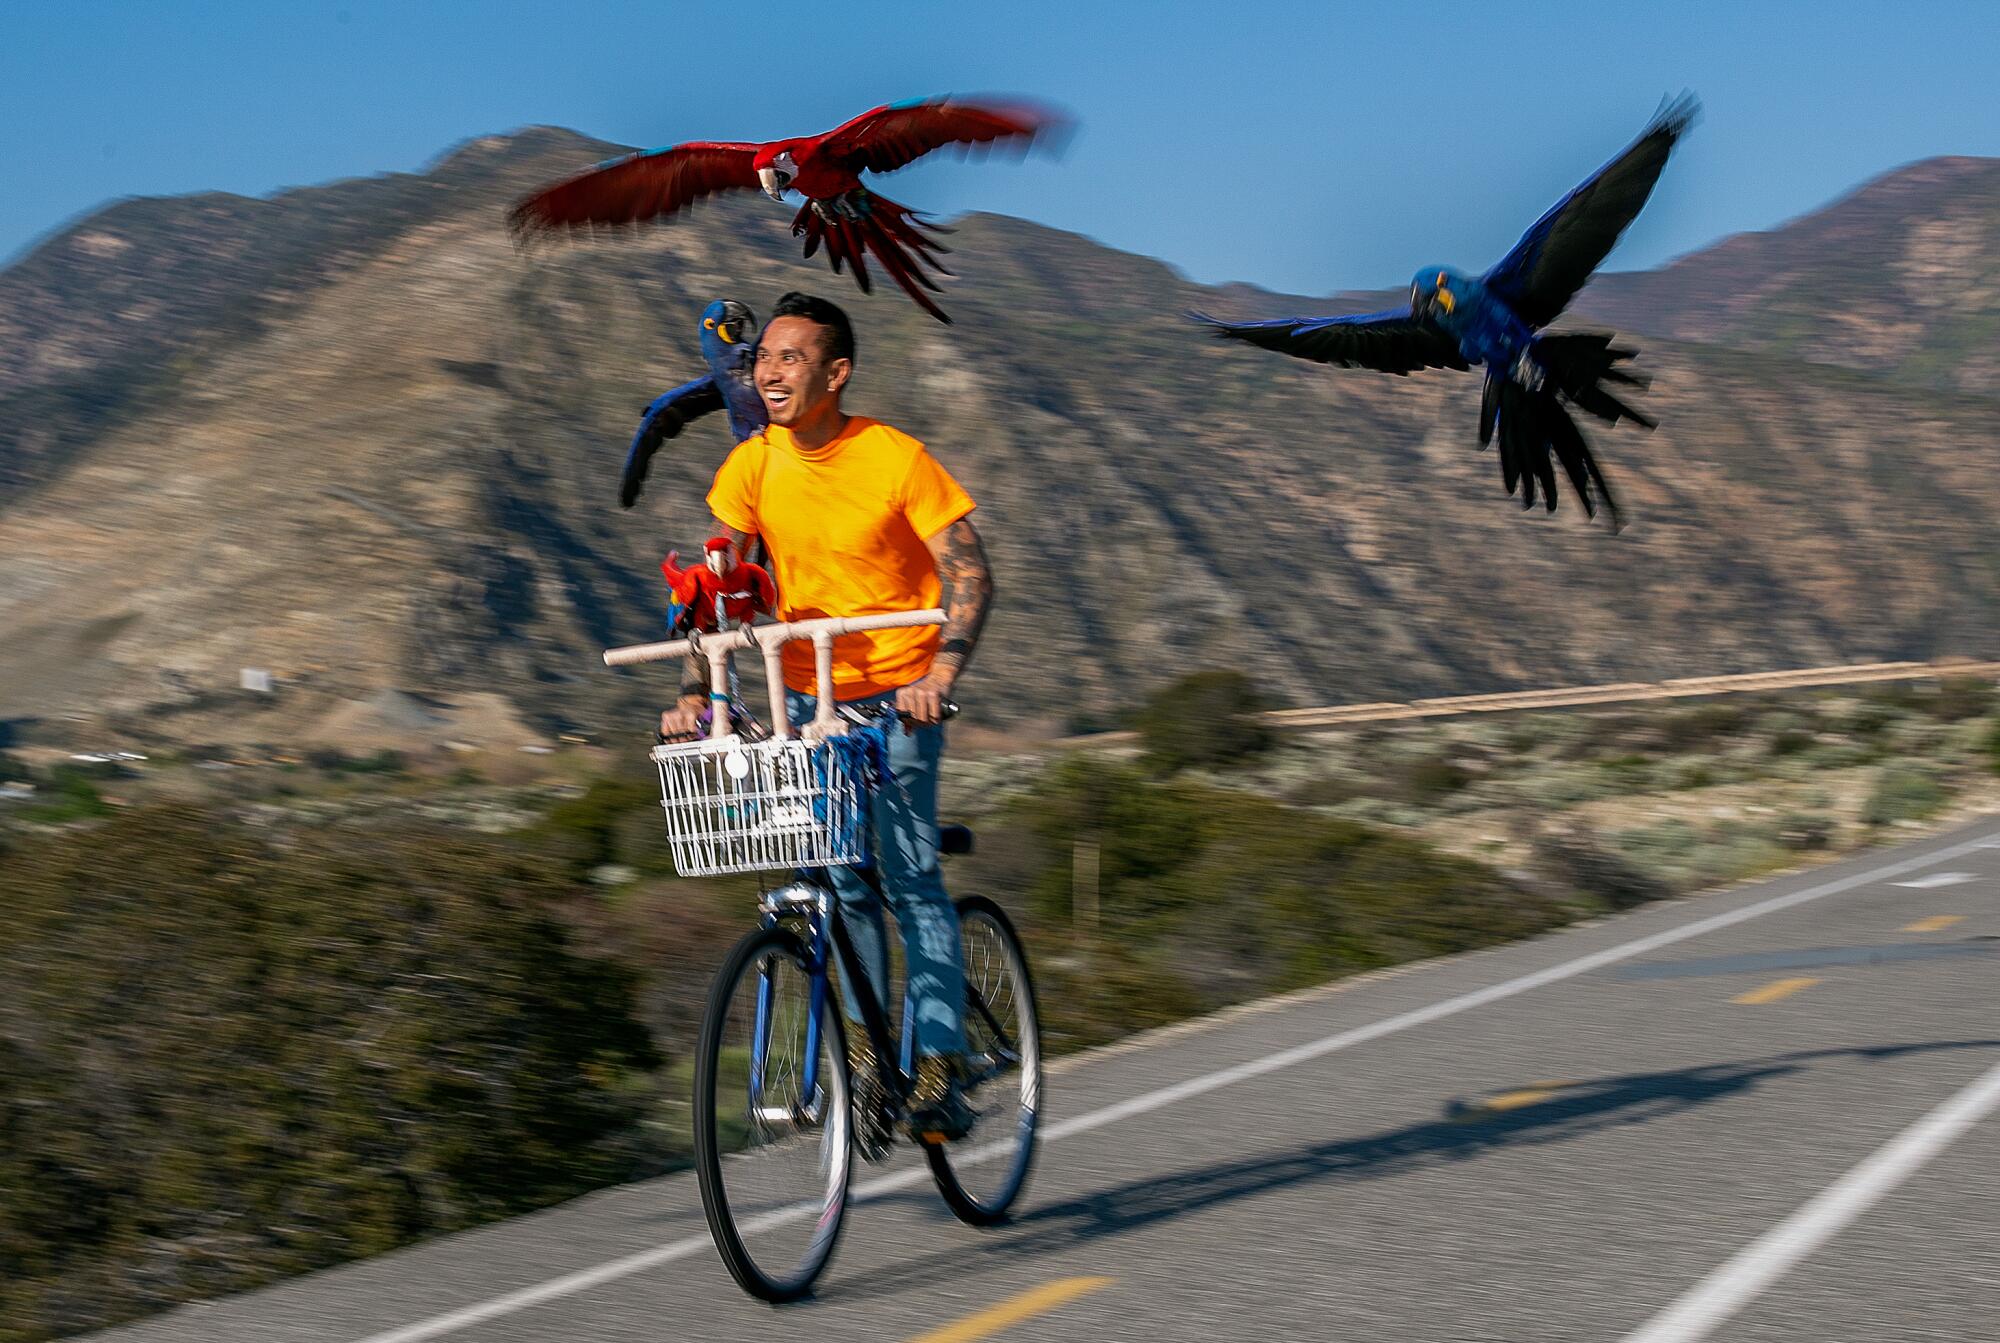 Chan Quach, also known as Chan the Birdman, bikes with his hyacinth macaws flying overhead.